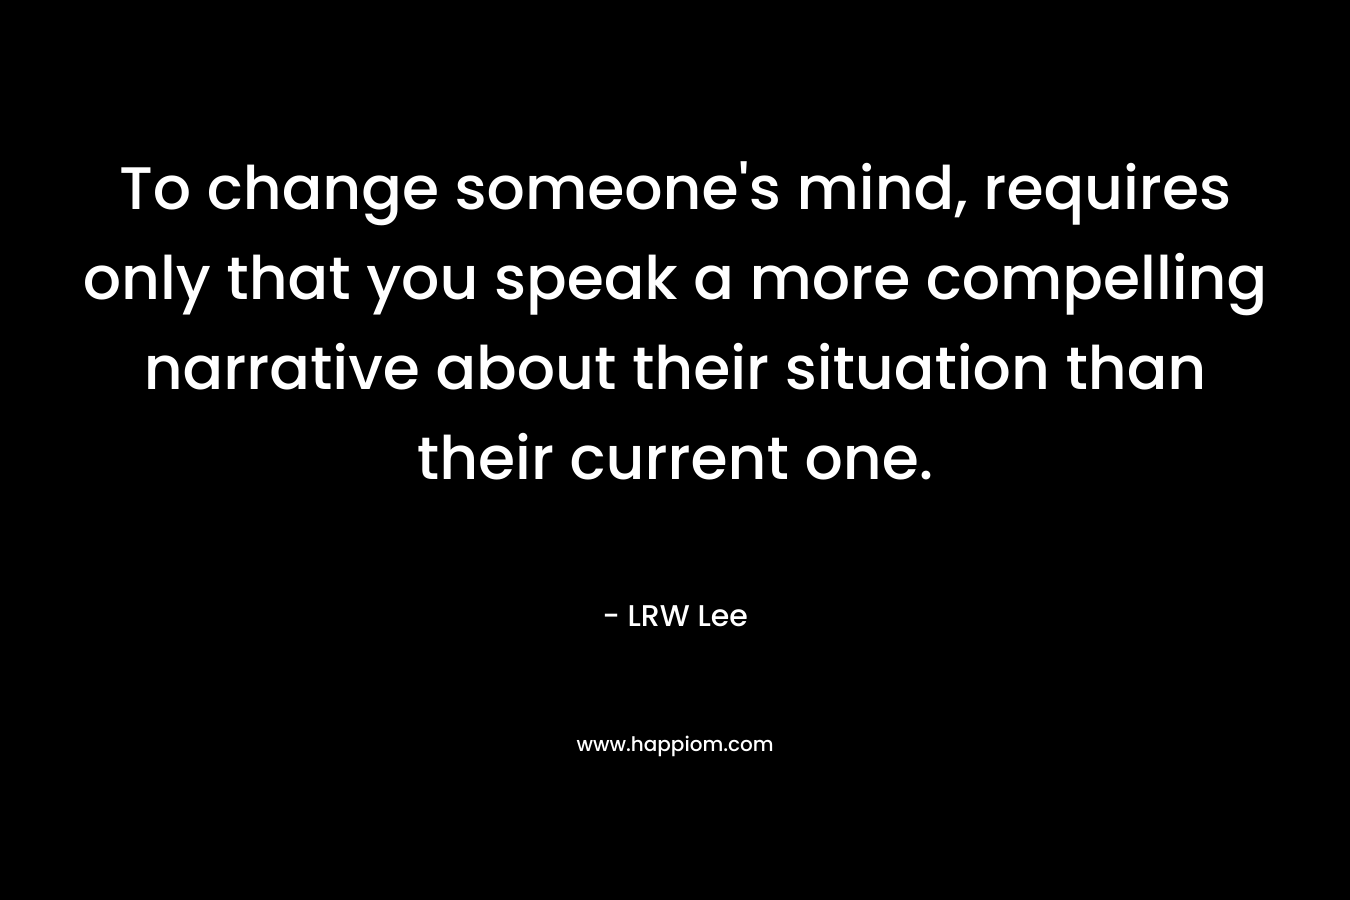 To change someone's mind, requires only that you speak a more compelling narrative about their situation than their current one.